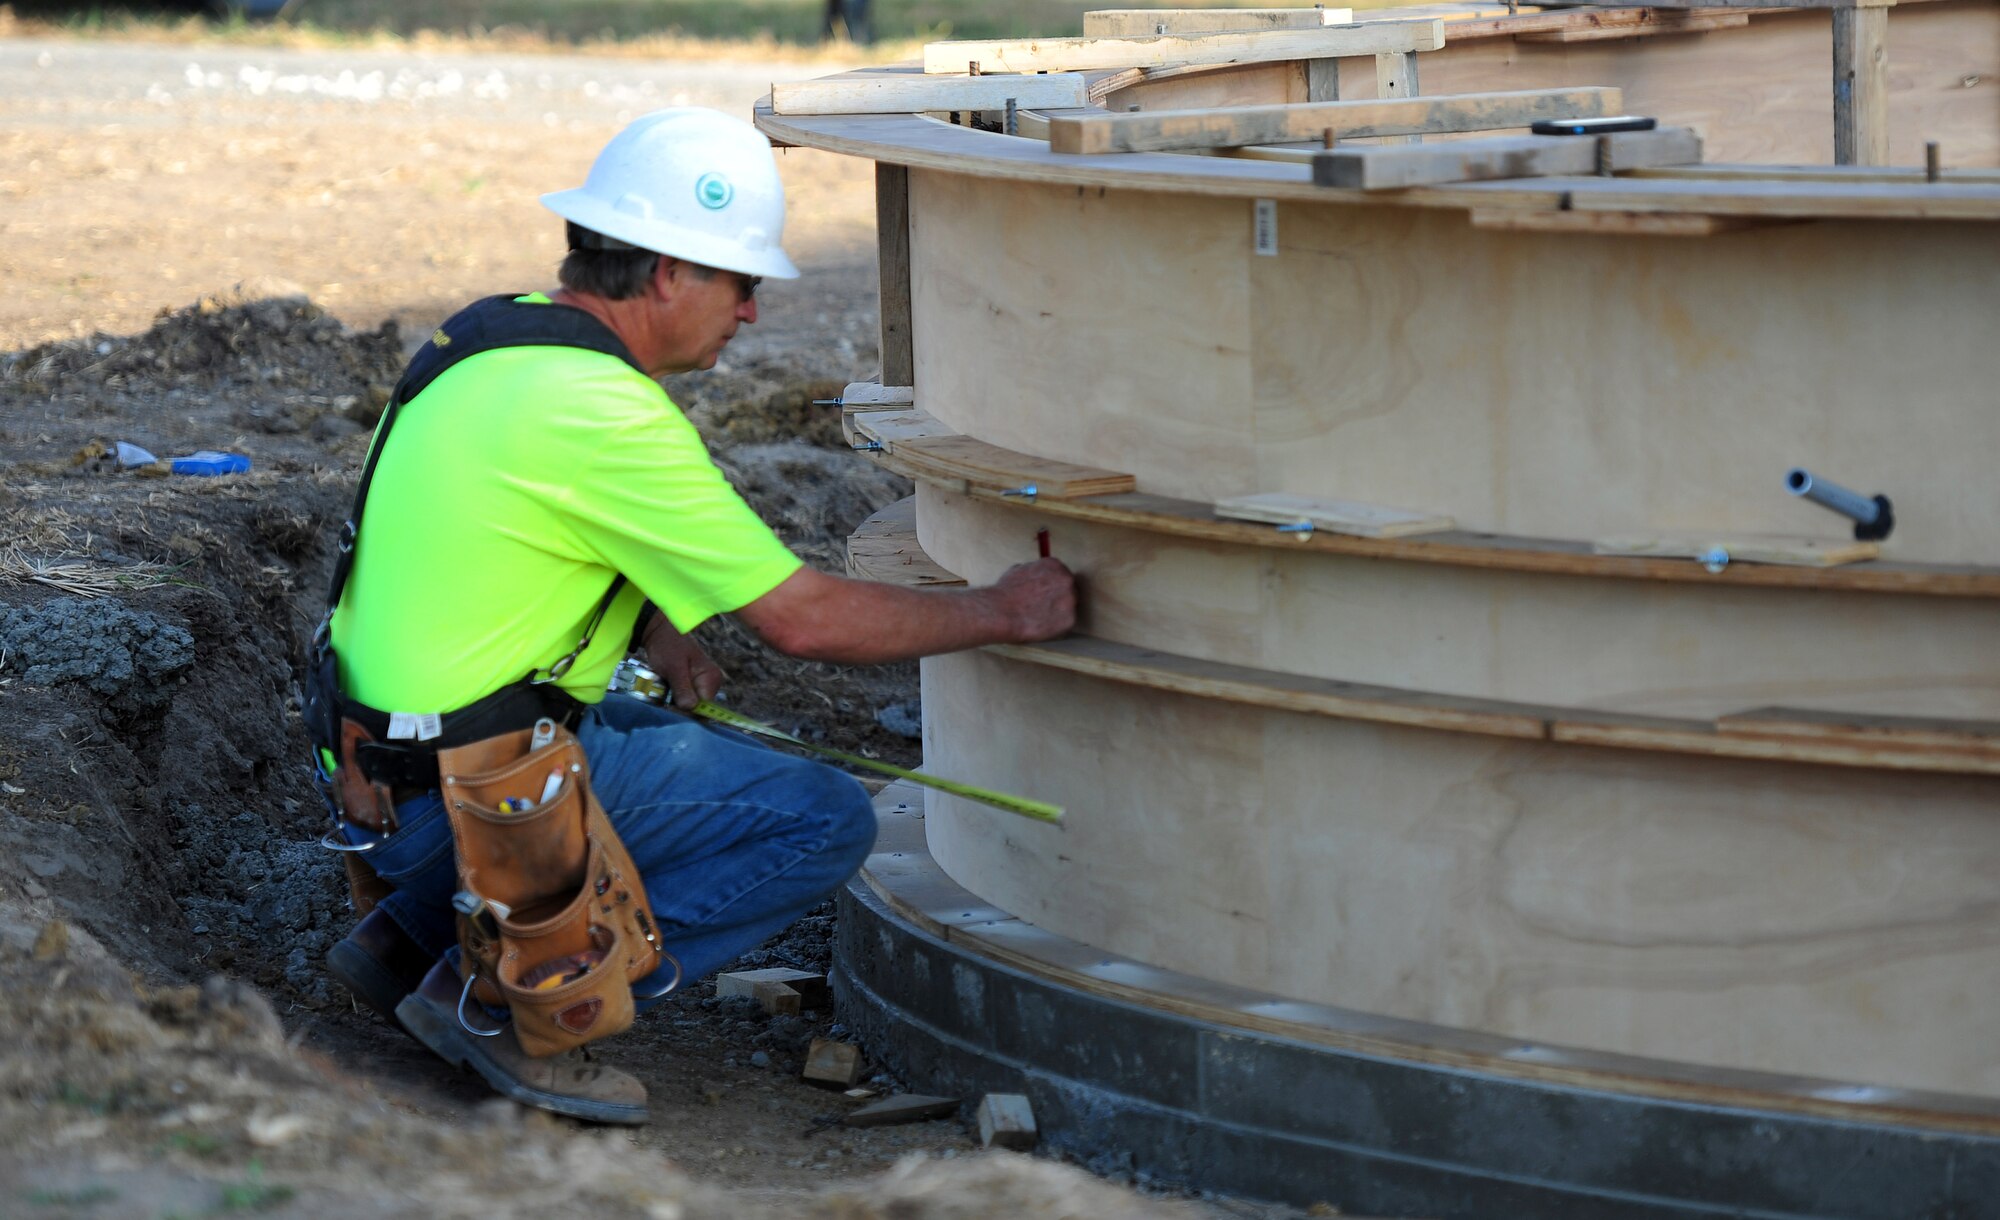 George Arney, a construction carpenter, marks drill holes in a new fire pit located near the Ike Skelton pavilion Oct. 21, 2015, at Whiteman Air Force Base, Mo. Form ties are inserted into the holes and used to prevent the structure from spreading when concrete is poured into the seating and supporting wall. The pavilion and stage area is scheduled to be closed until mid-December 2015. (U.S. Air Force photo by Airman 1st Class Jazmin Smith/Released)